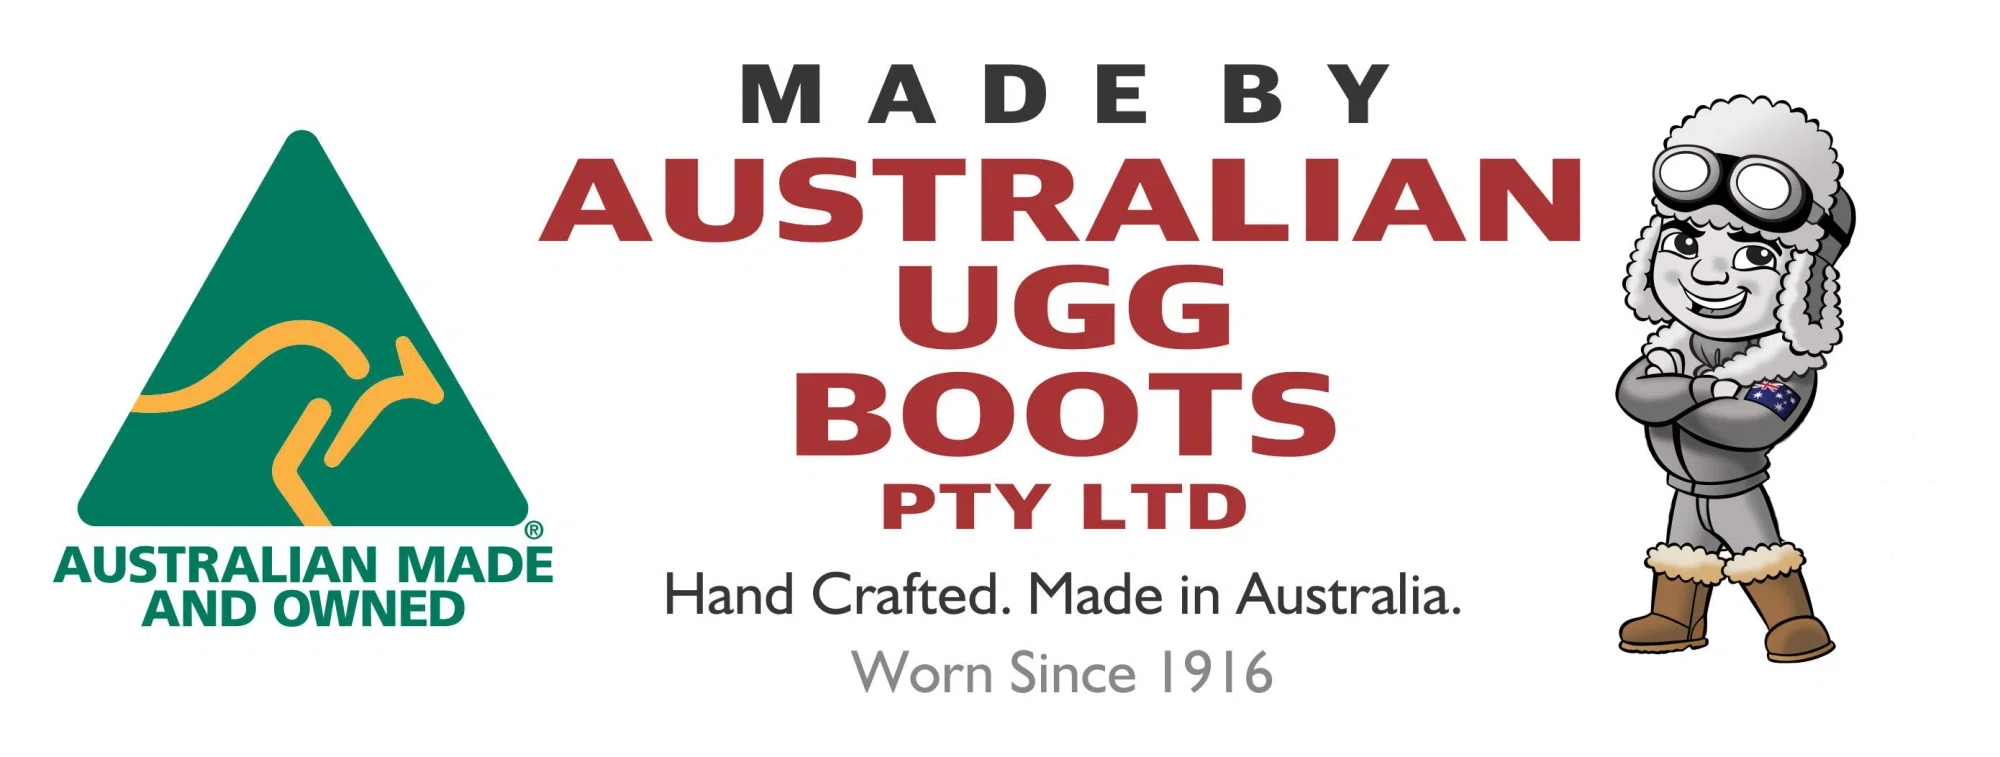 ugg boots promo code